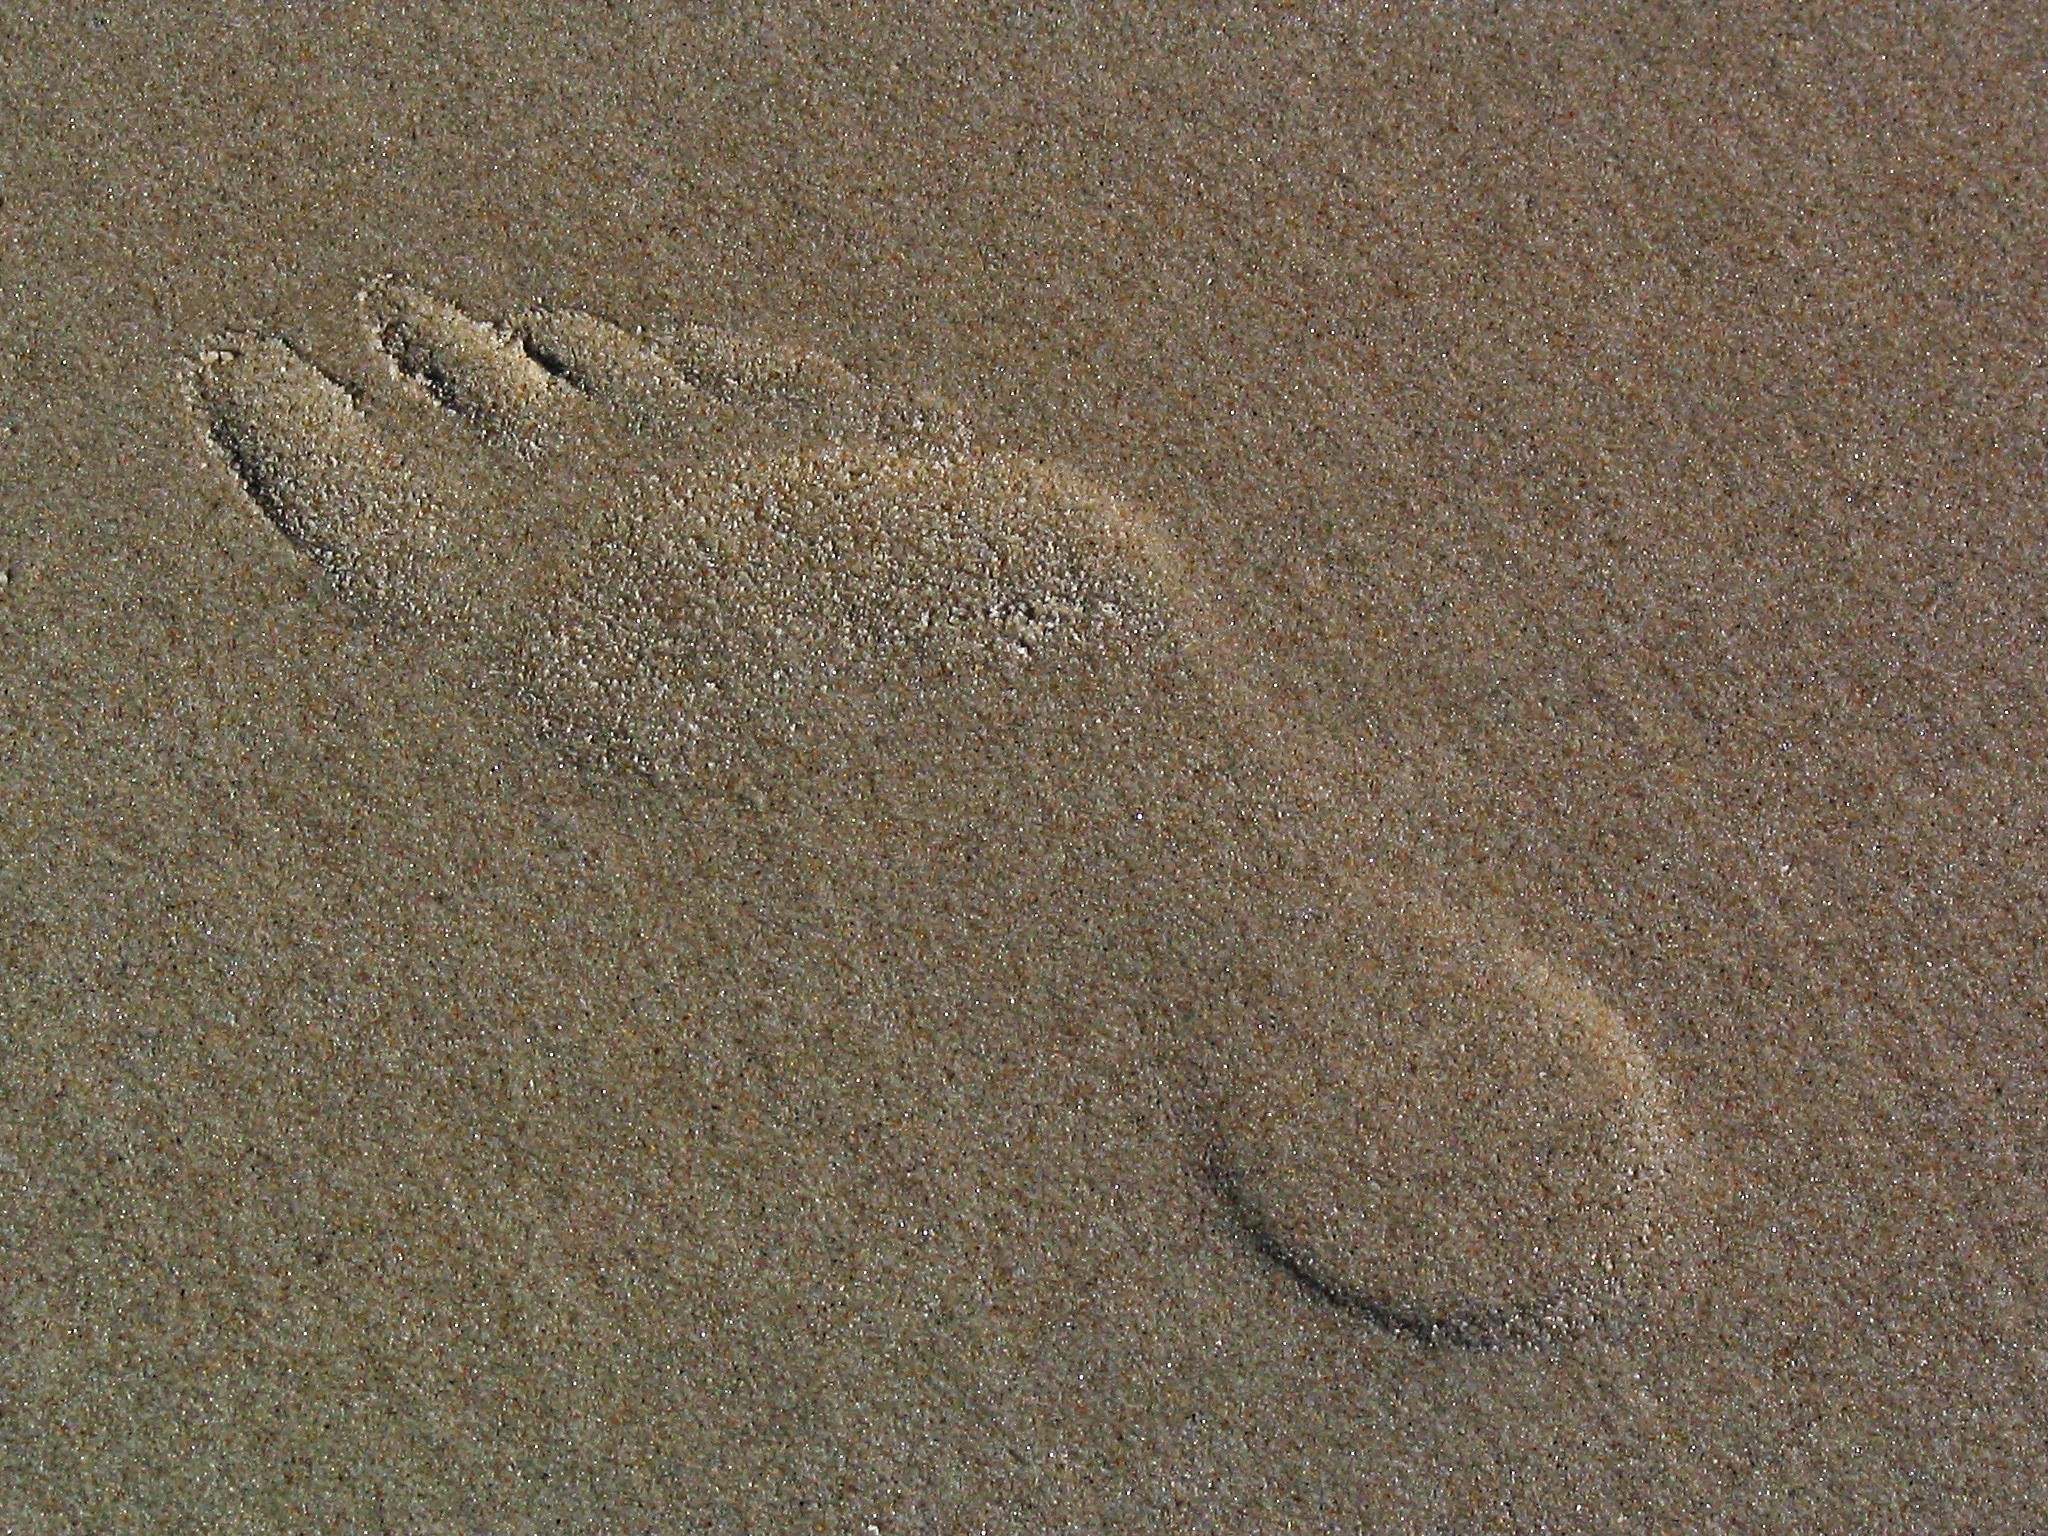 2048x1536 footprints in the sand illustration